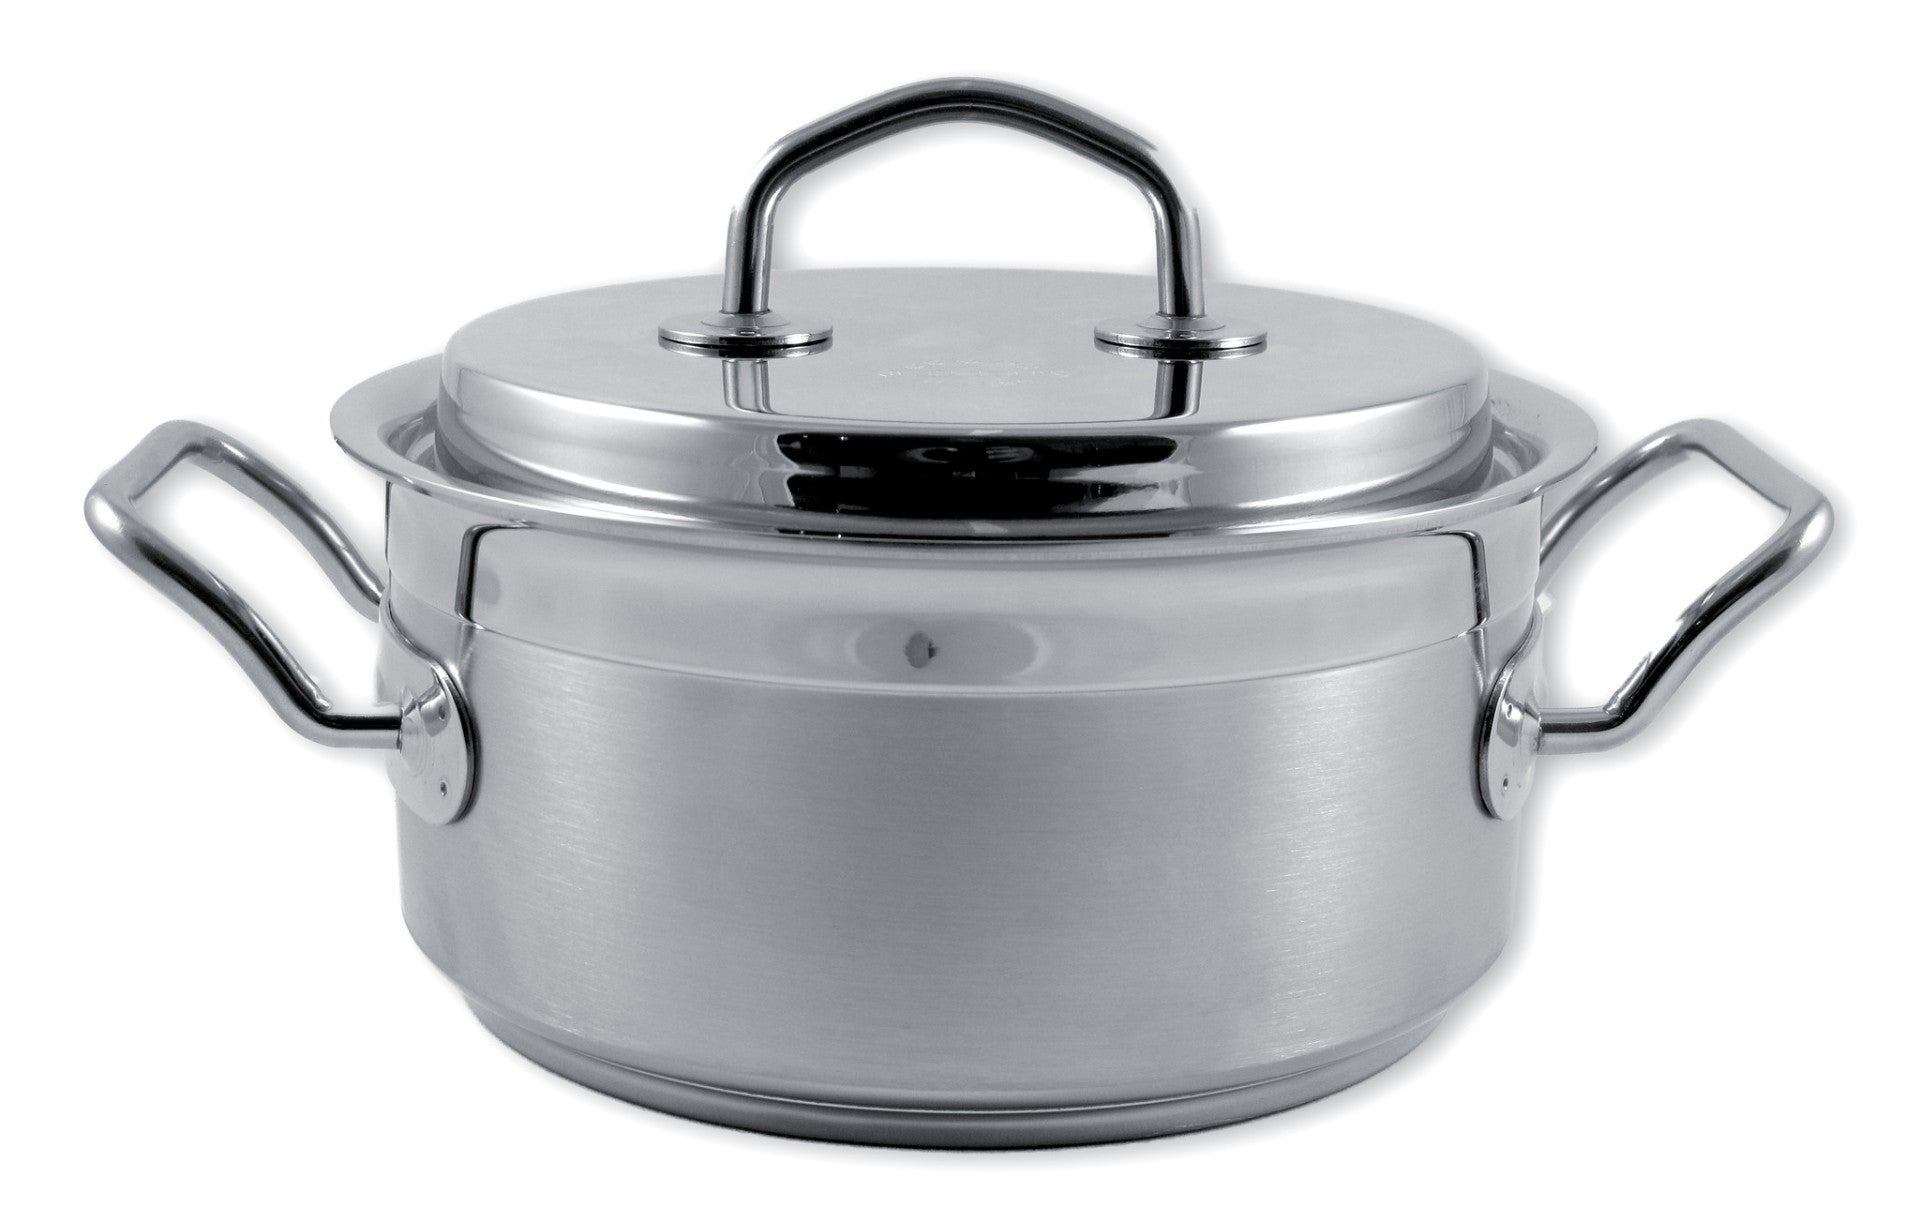 Silga Teknika World's Best Stainless Steel Cookware Saucepan or Casserole with a lid - 4.7 litre